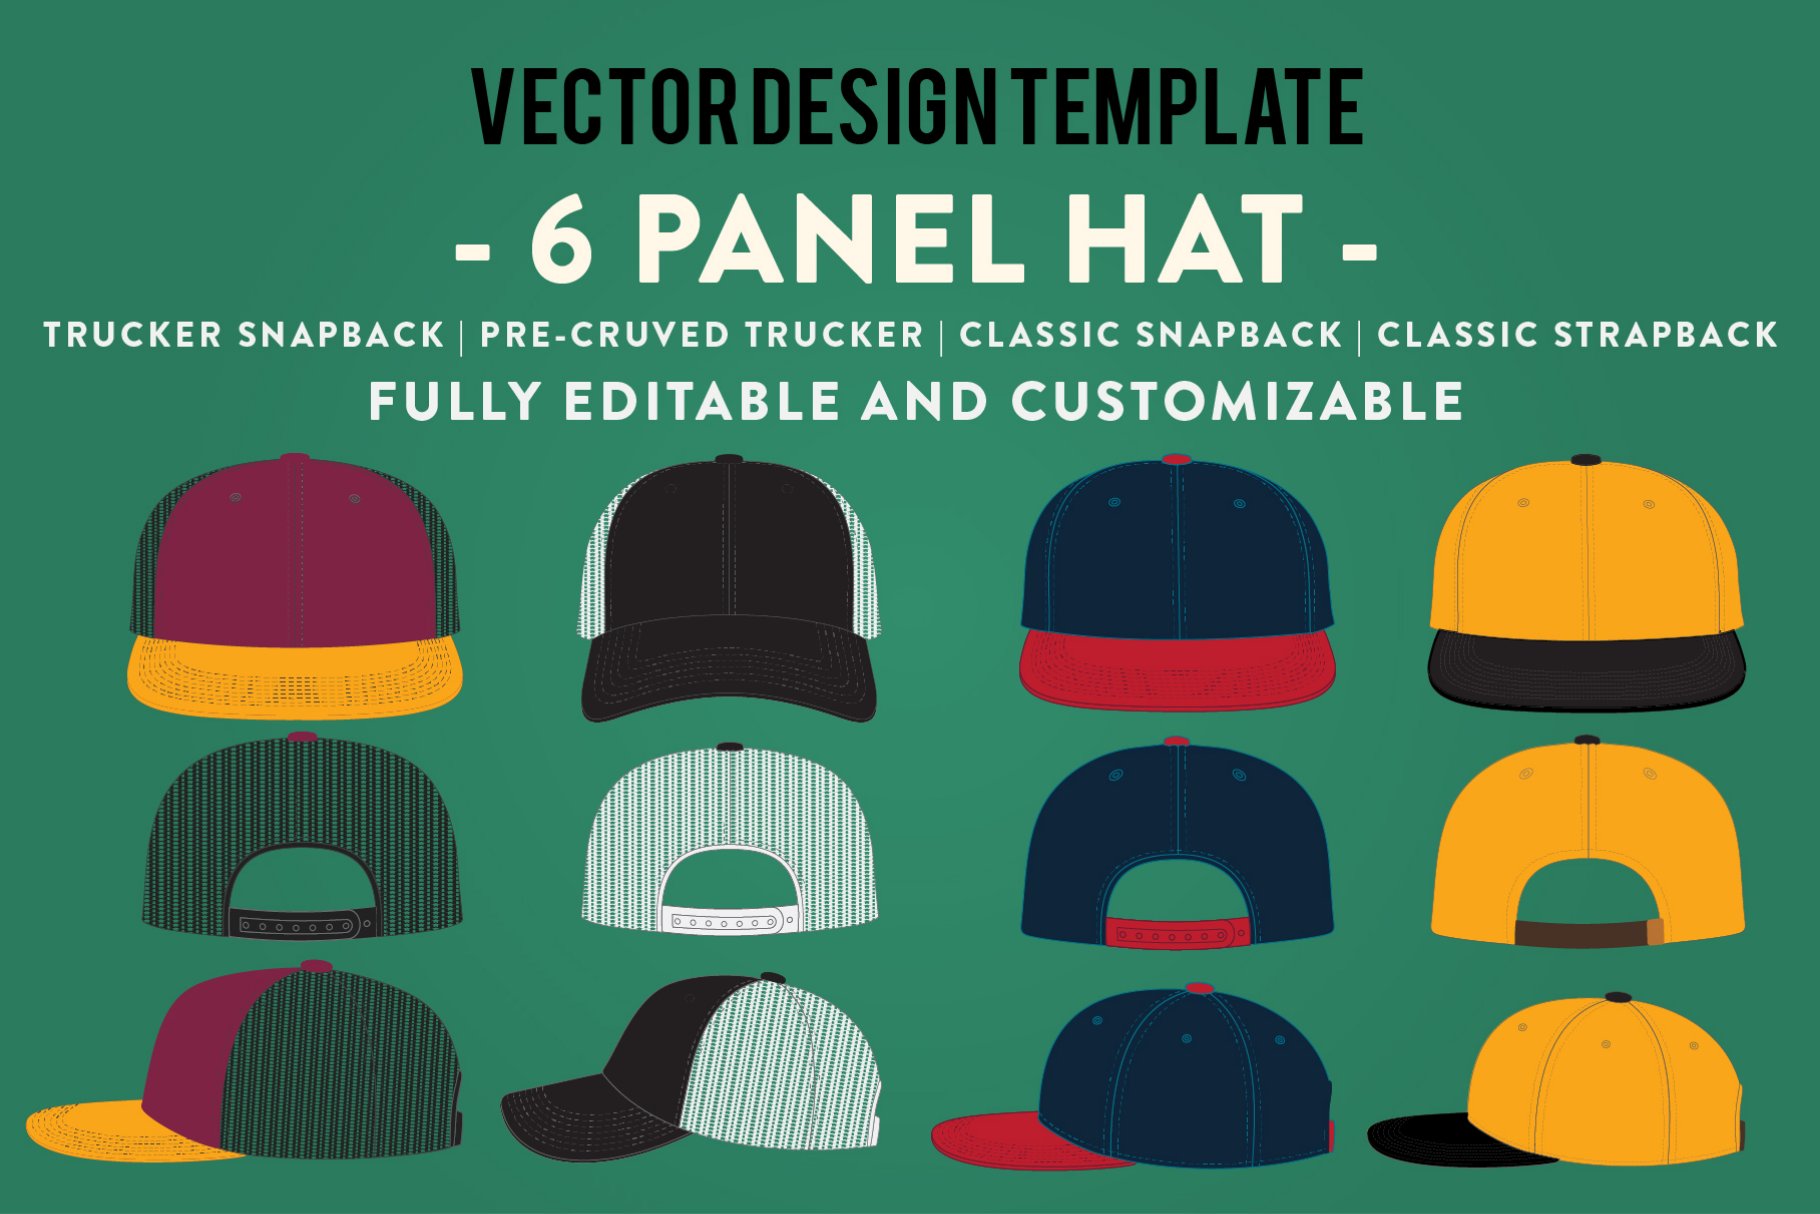 Hat Template - 6 Panel Hat cover image.